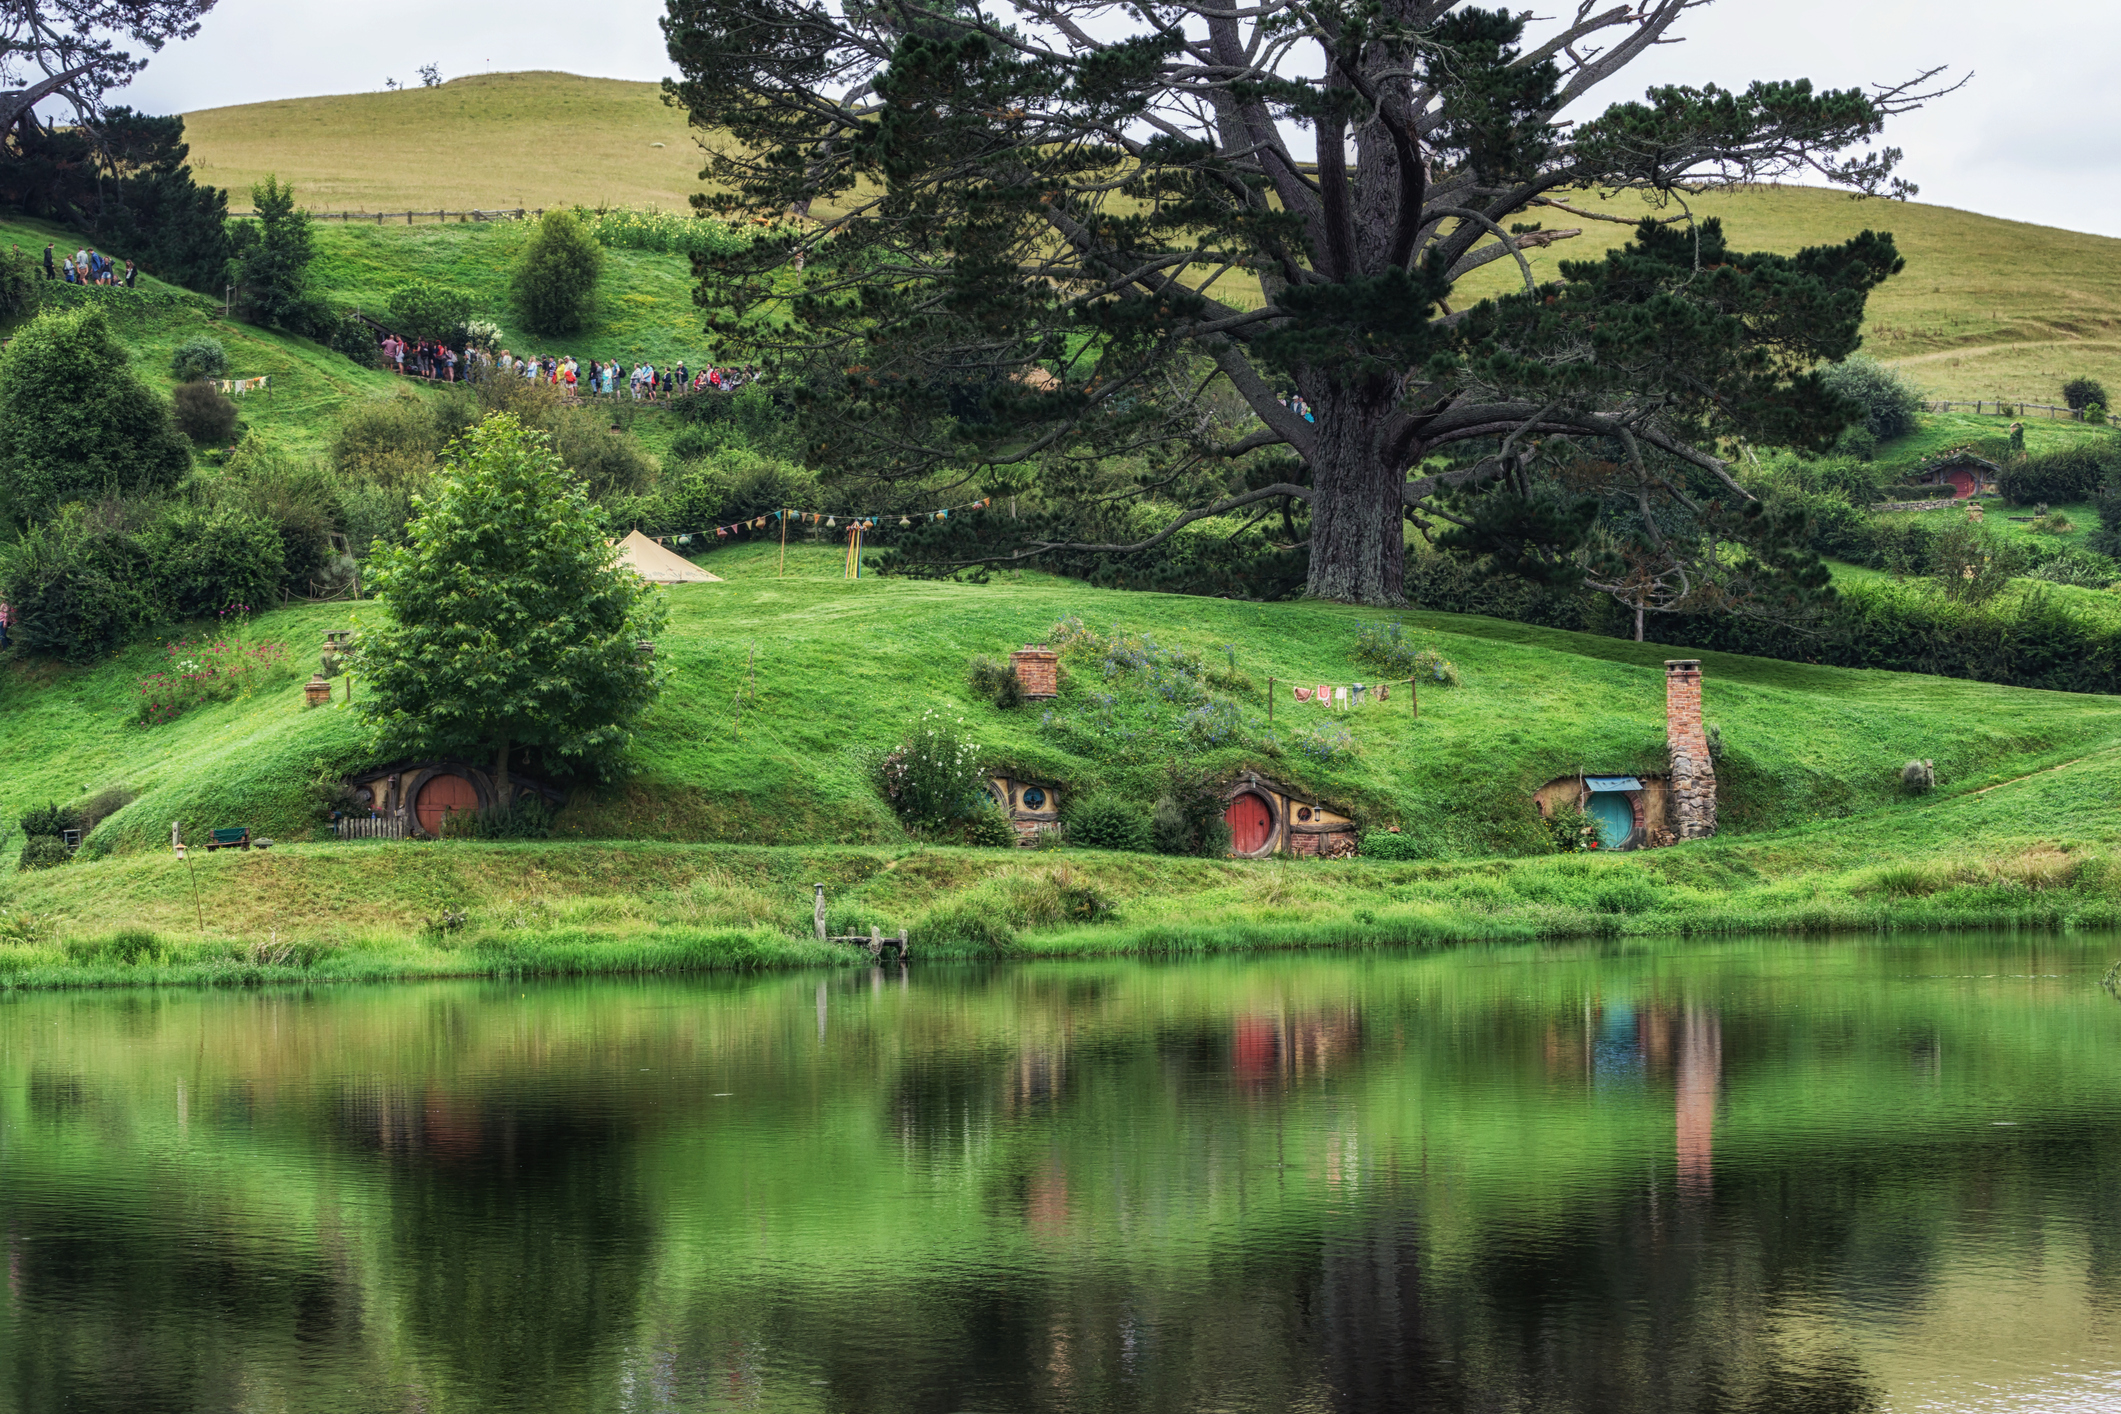 New Zealand, a Middle Earth destination